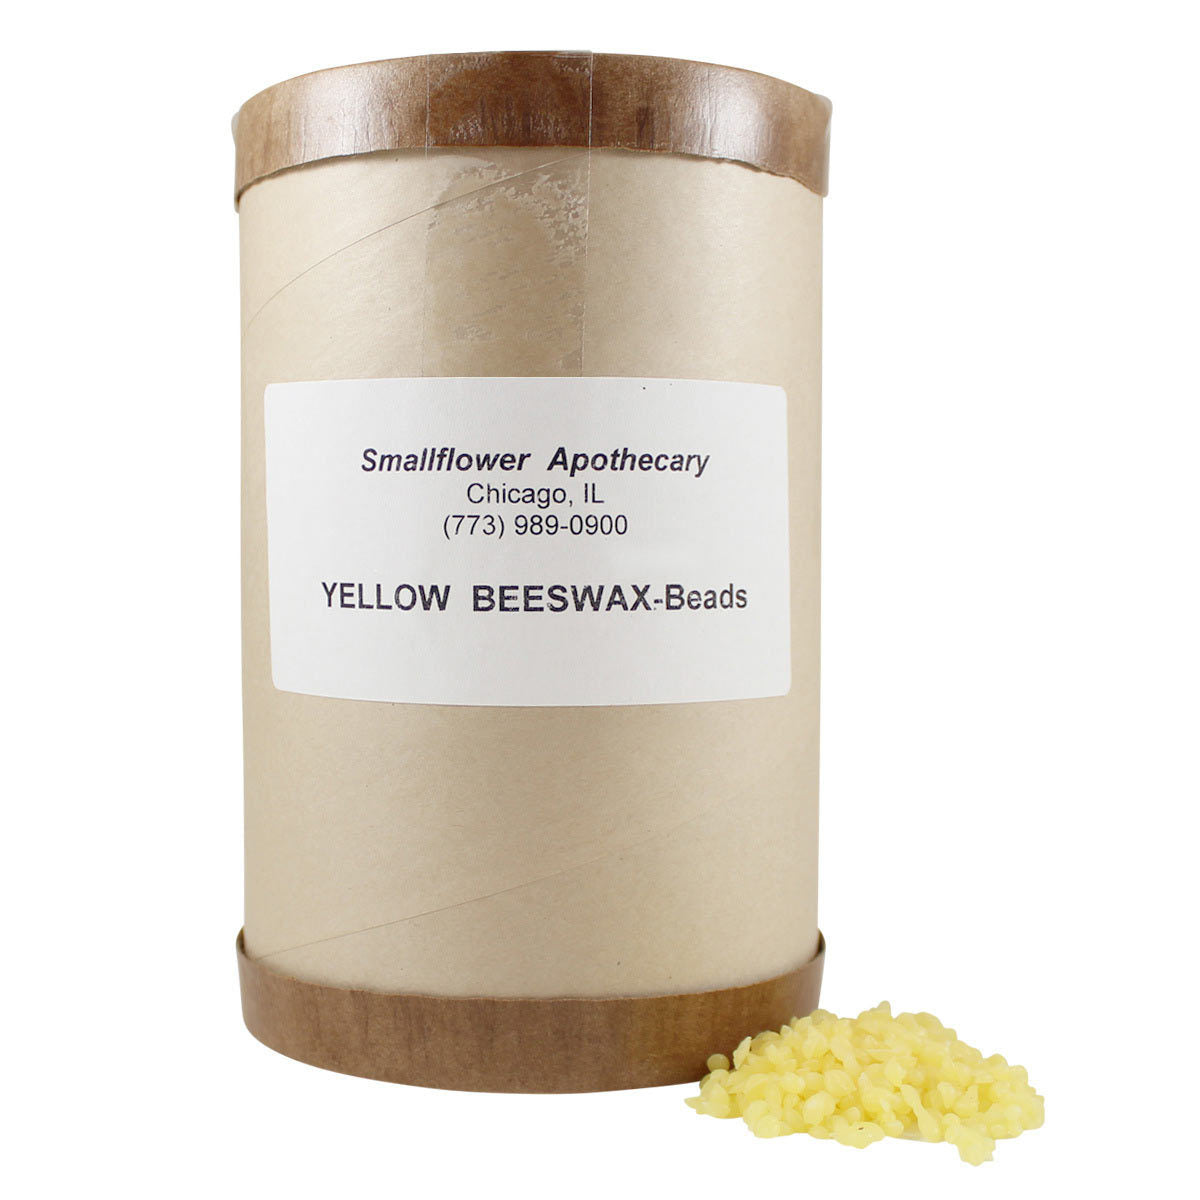 Primary image of Yellow Beeswax Beads